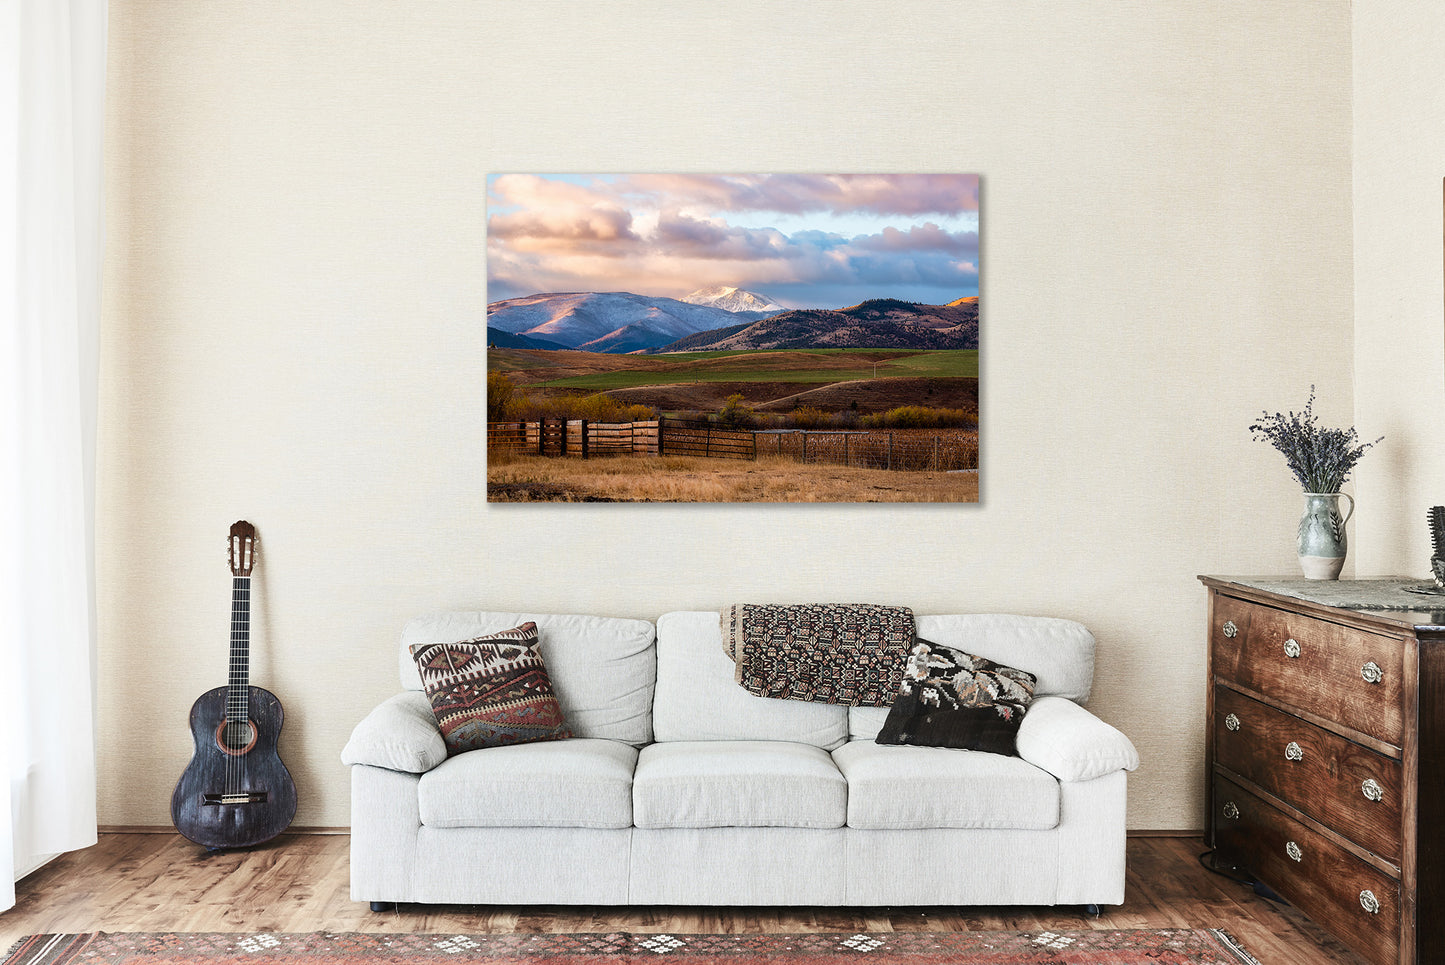 Western Canvas Wall Art - Gallery Wrap of Snowy Peak and Mountain Landscape Overlooking Valley on Autumn Day in Montana Rocky Mountain Decor